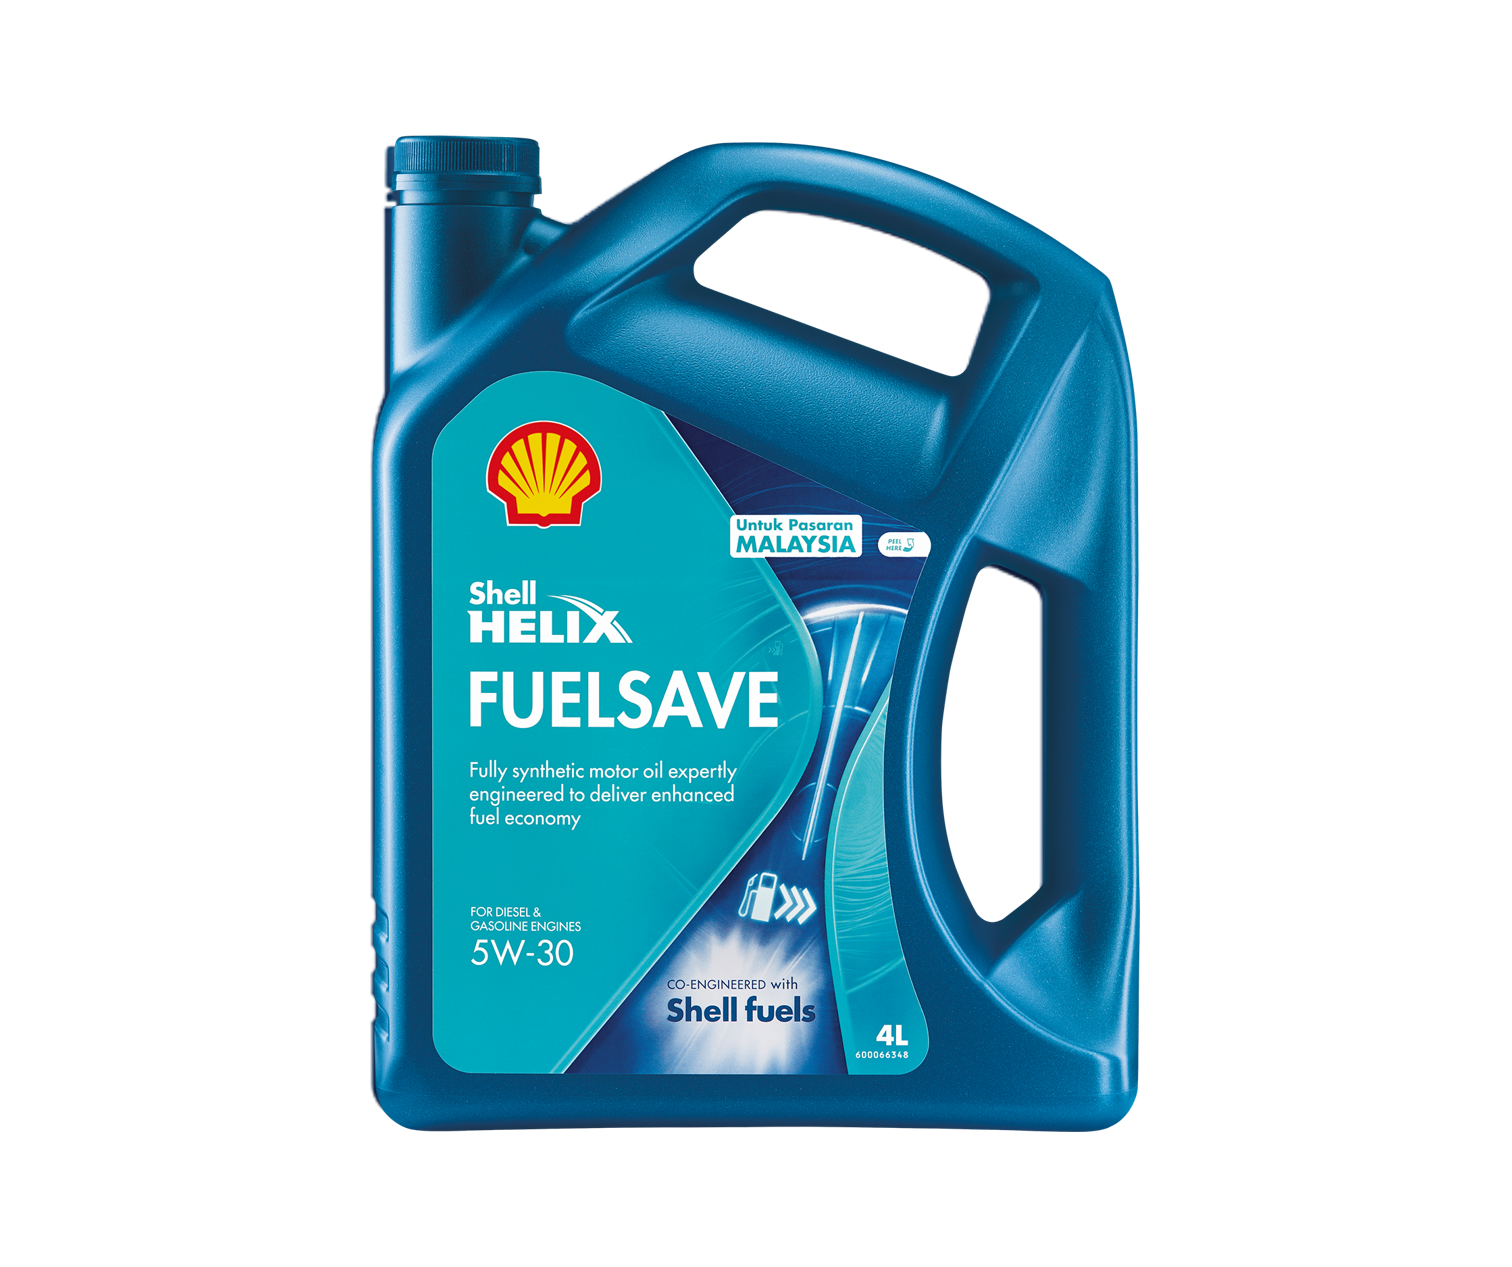 Shell Helix Fuel Save